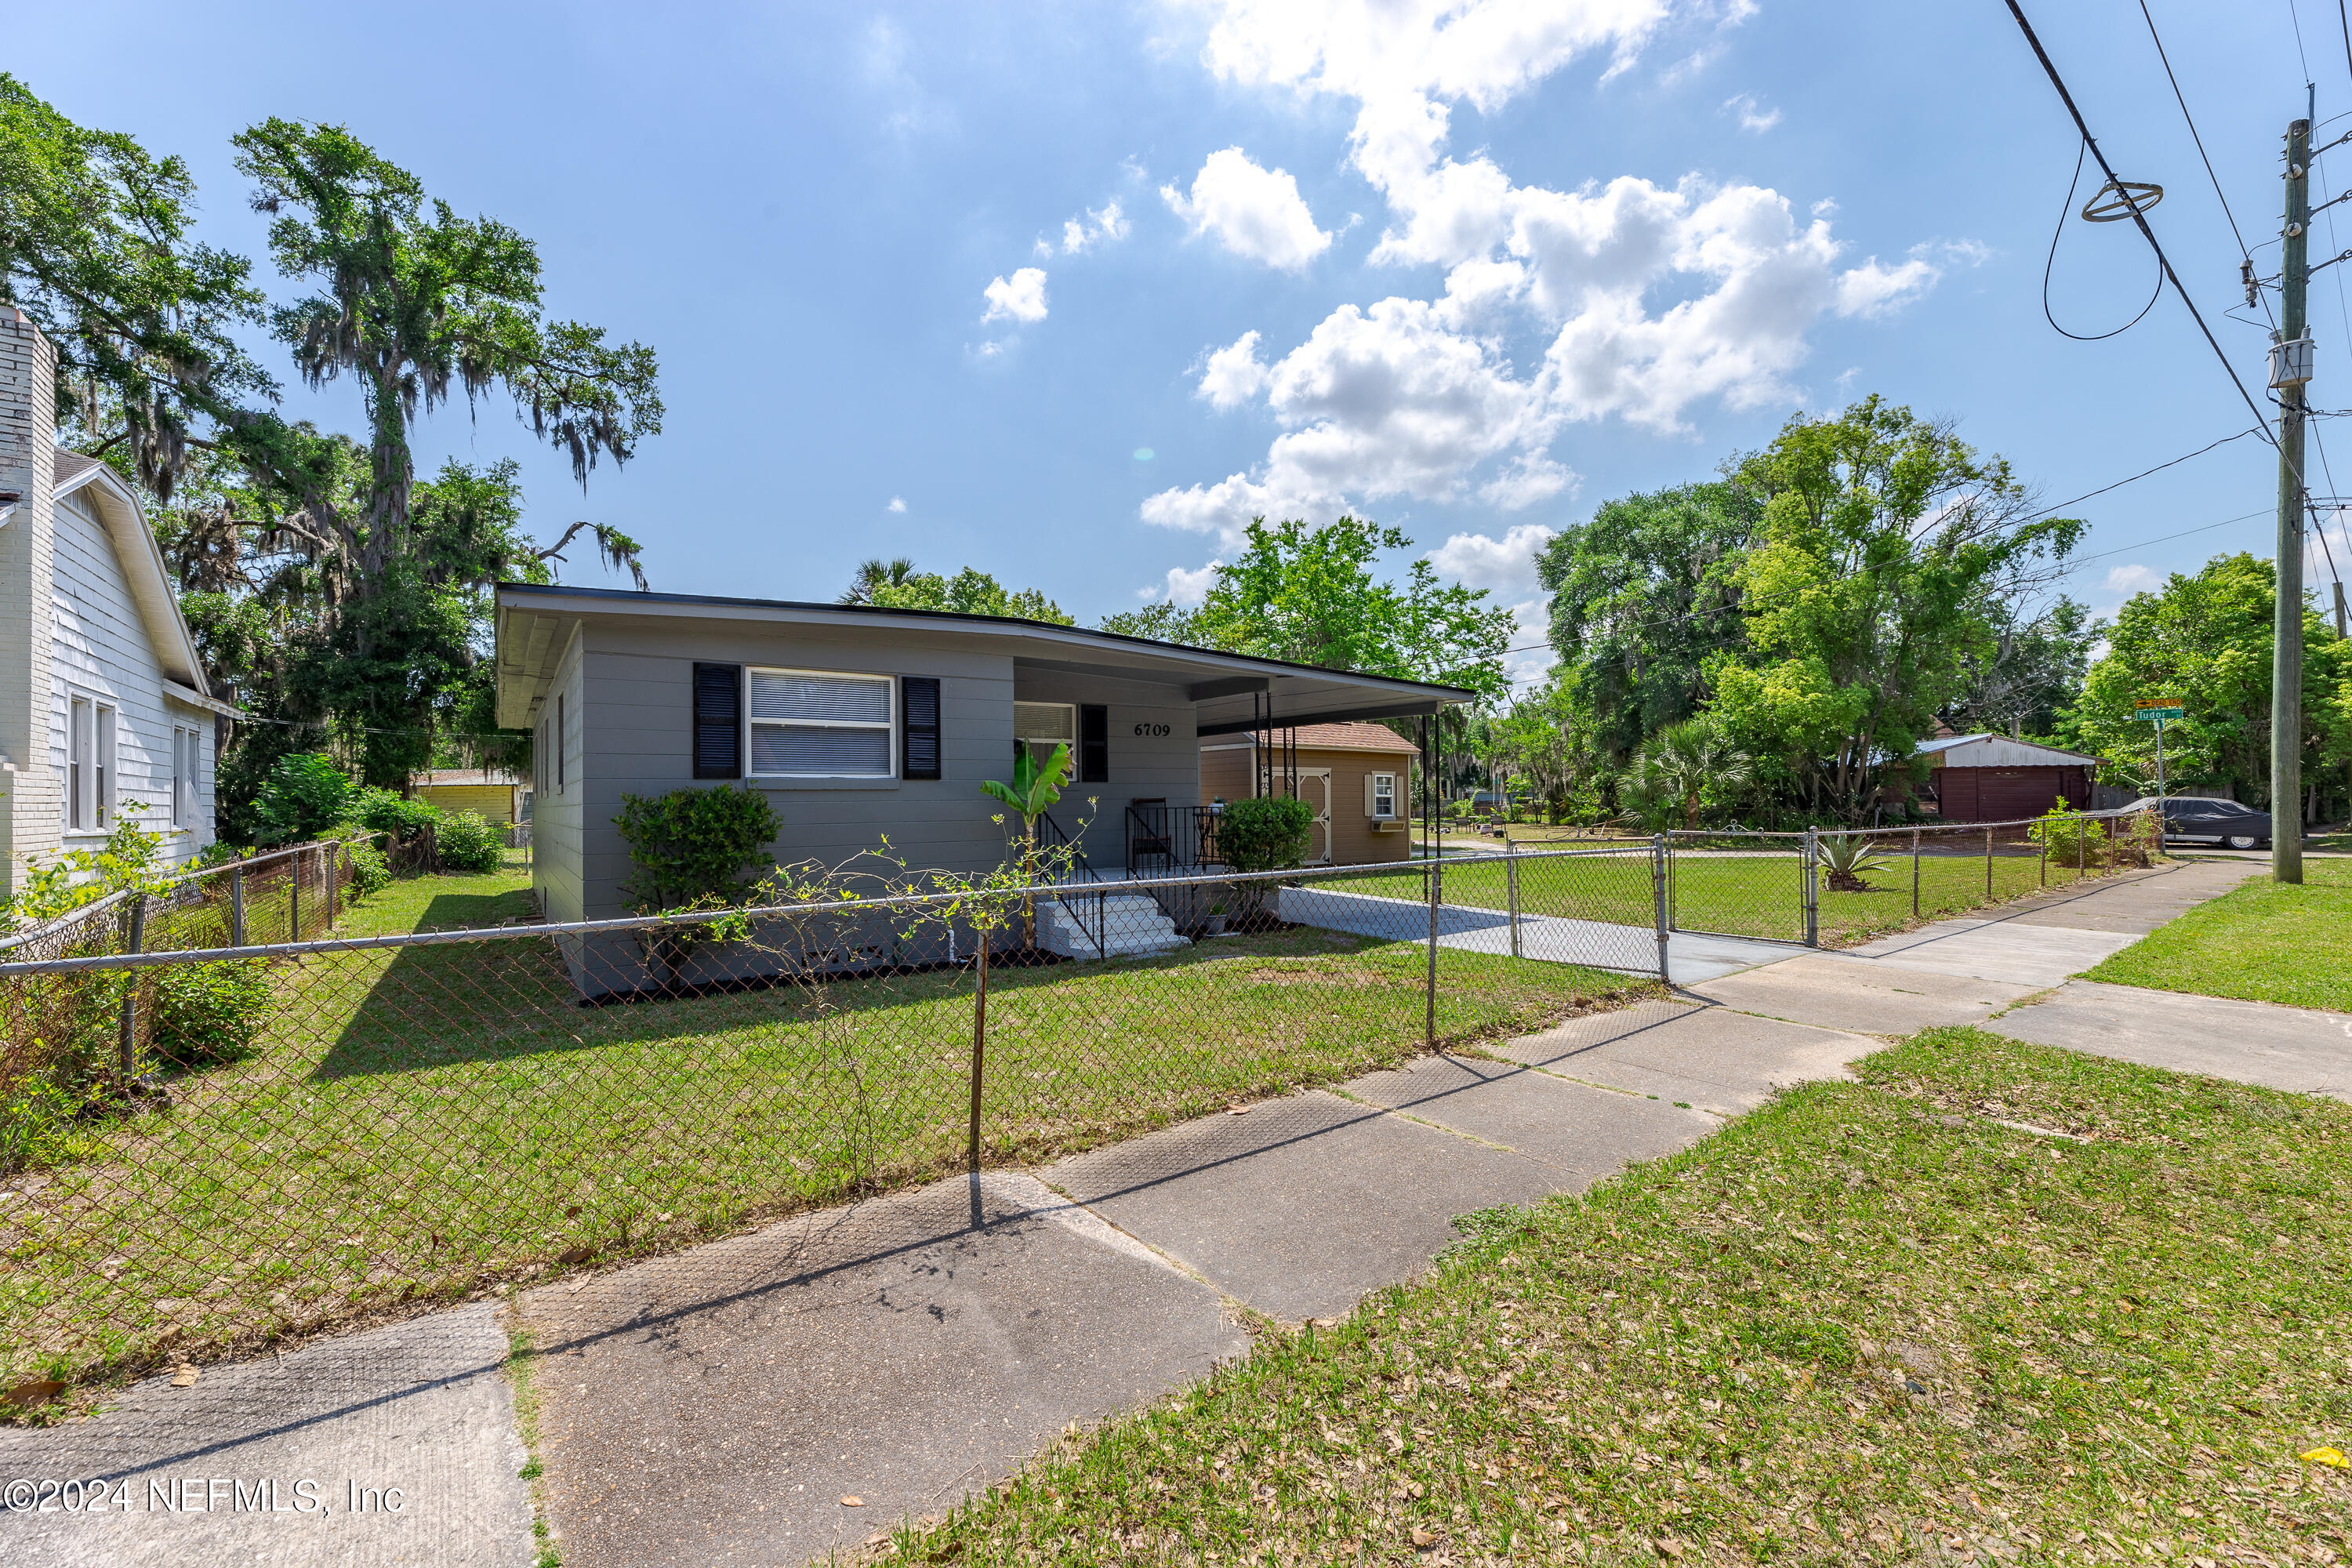 Jacksonville, FL home for sale located at 6709 N Pearl Street Unit 6709, Jacksonville, FL 32208